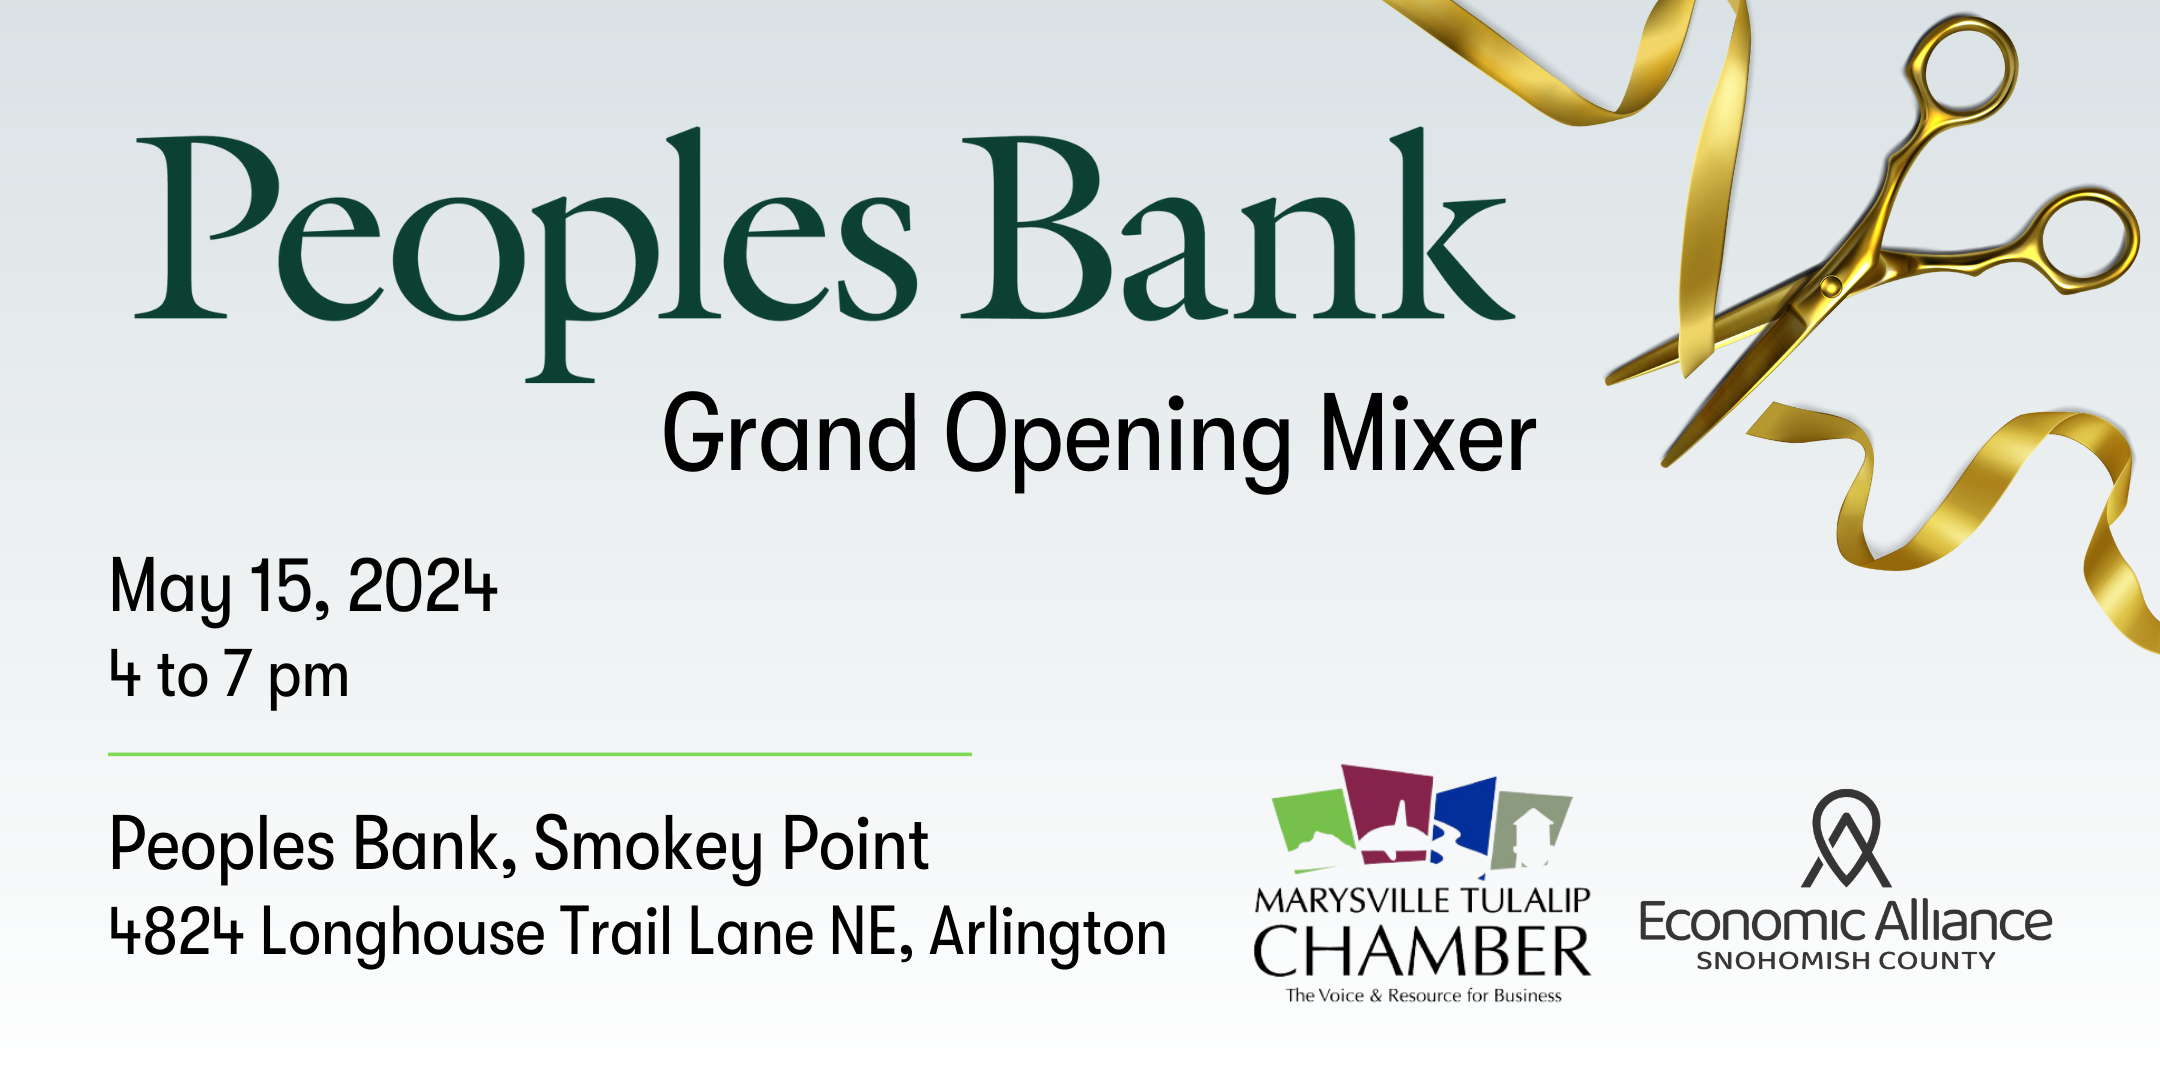 Event Promo Photo For Peoples Bank Grand Opening Mixer